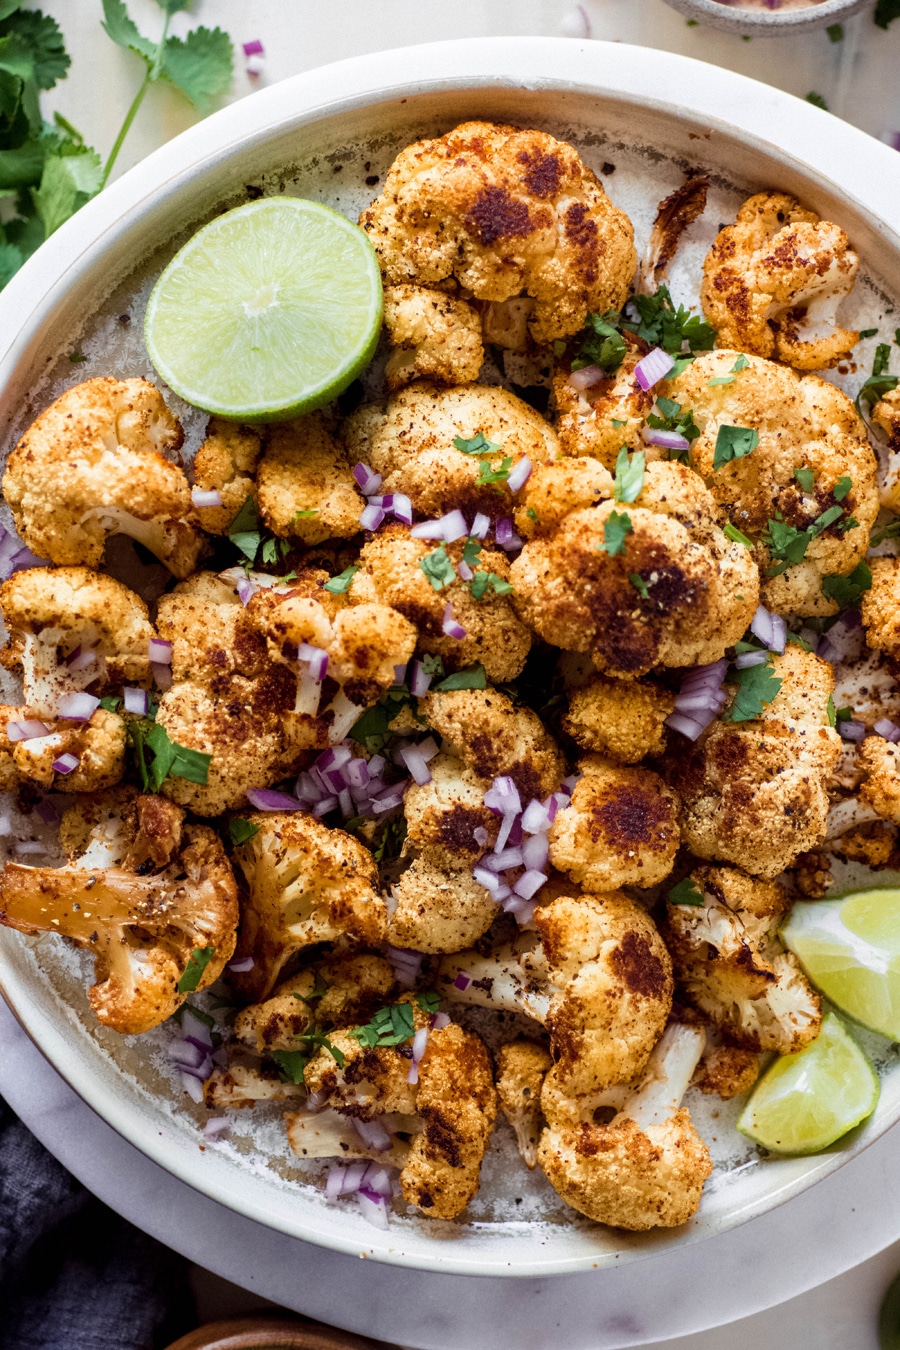 Overhead shot of a plate of mexican roasted cauliflower, topped with chopped red onion, cilantro, and lime wedges.